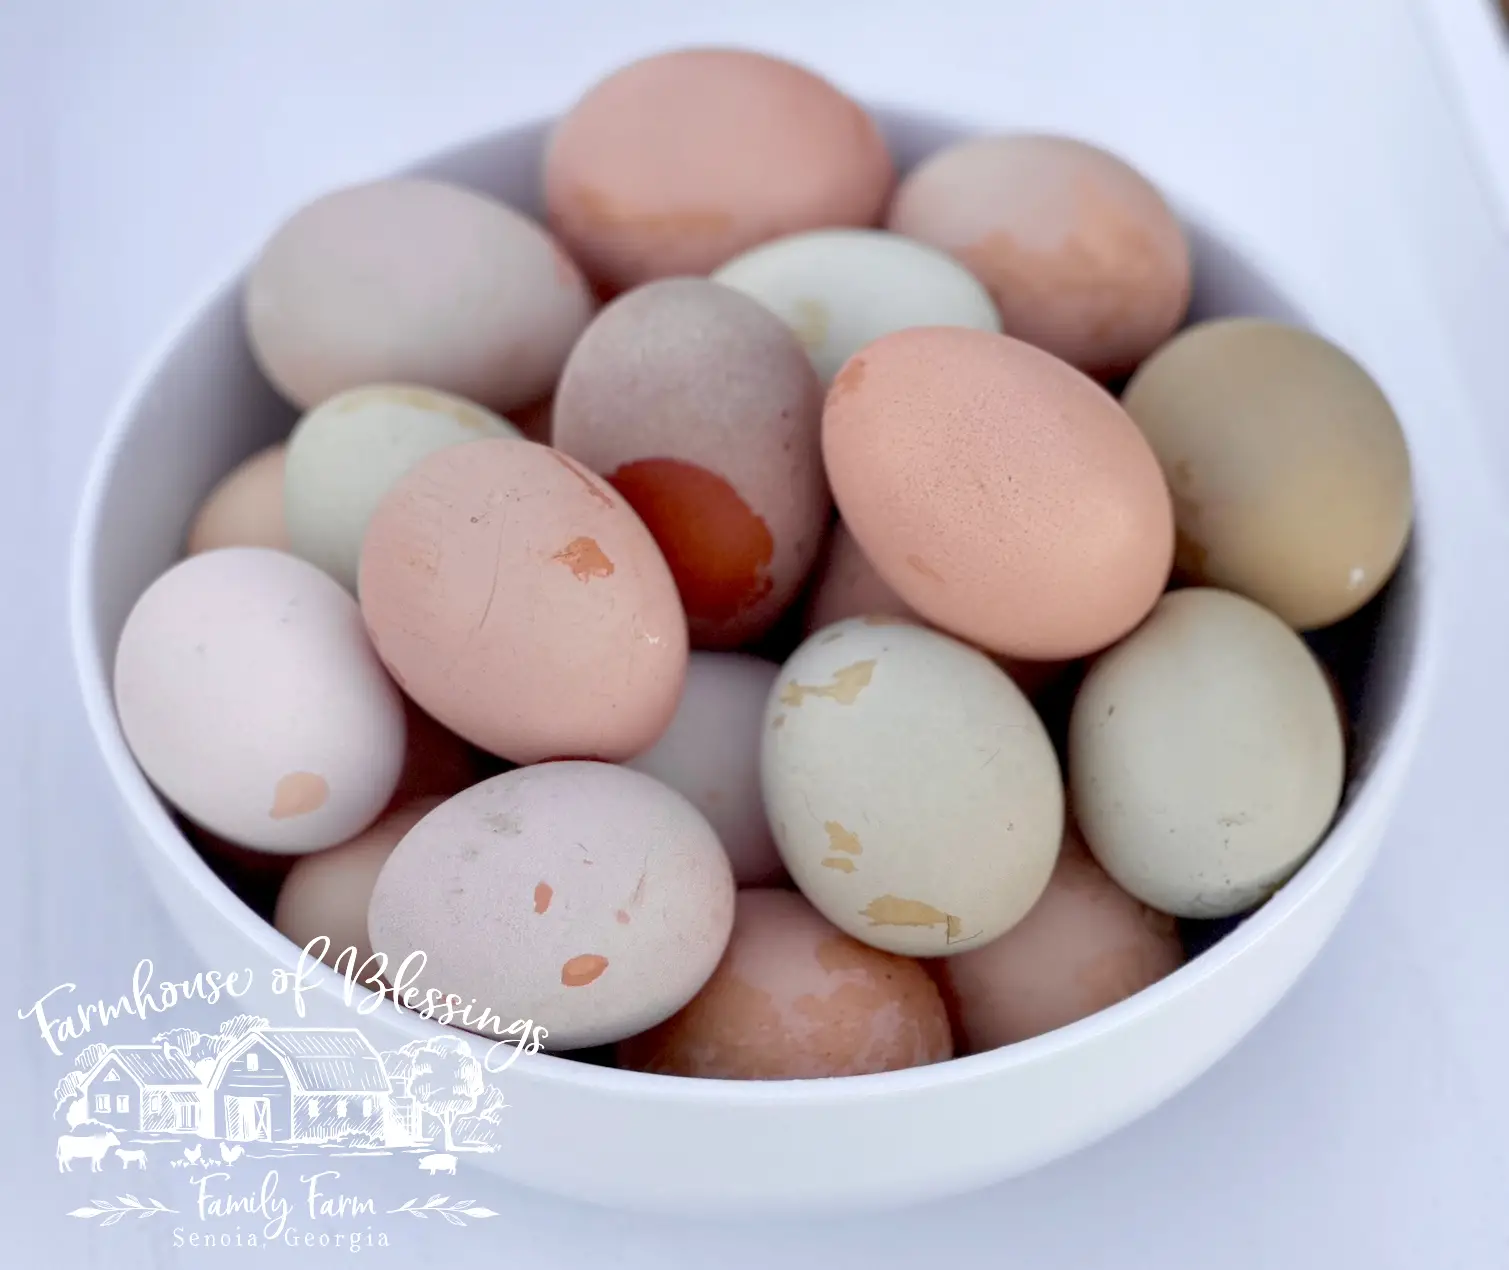 heavy bloom chicken eggs with water drips to show their various darker shell colors under the white bloom